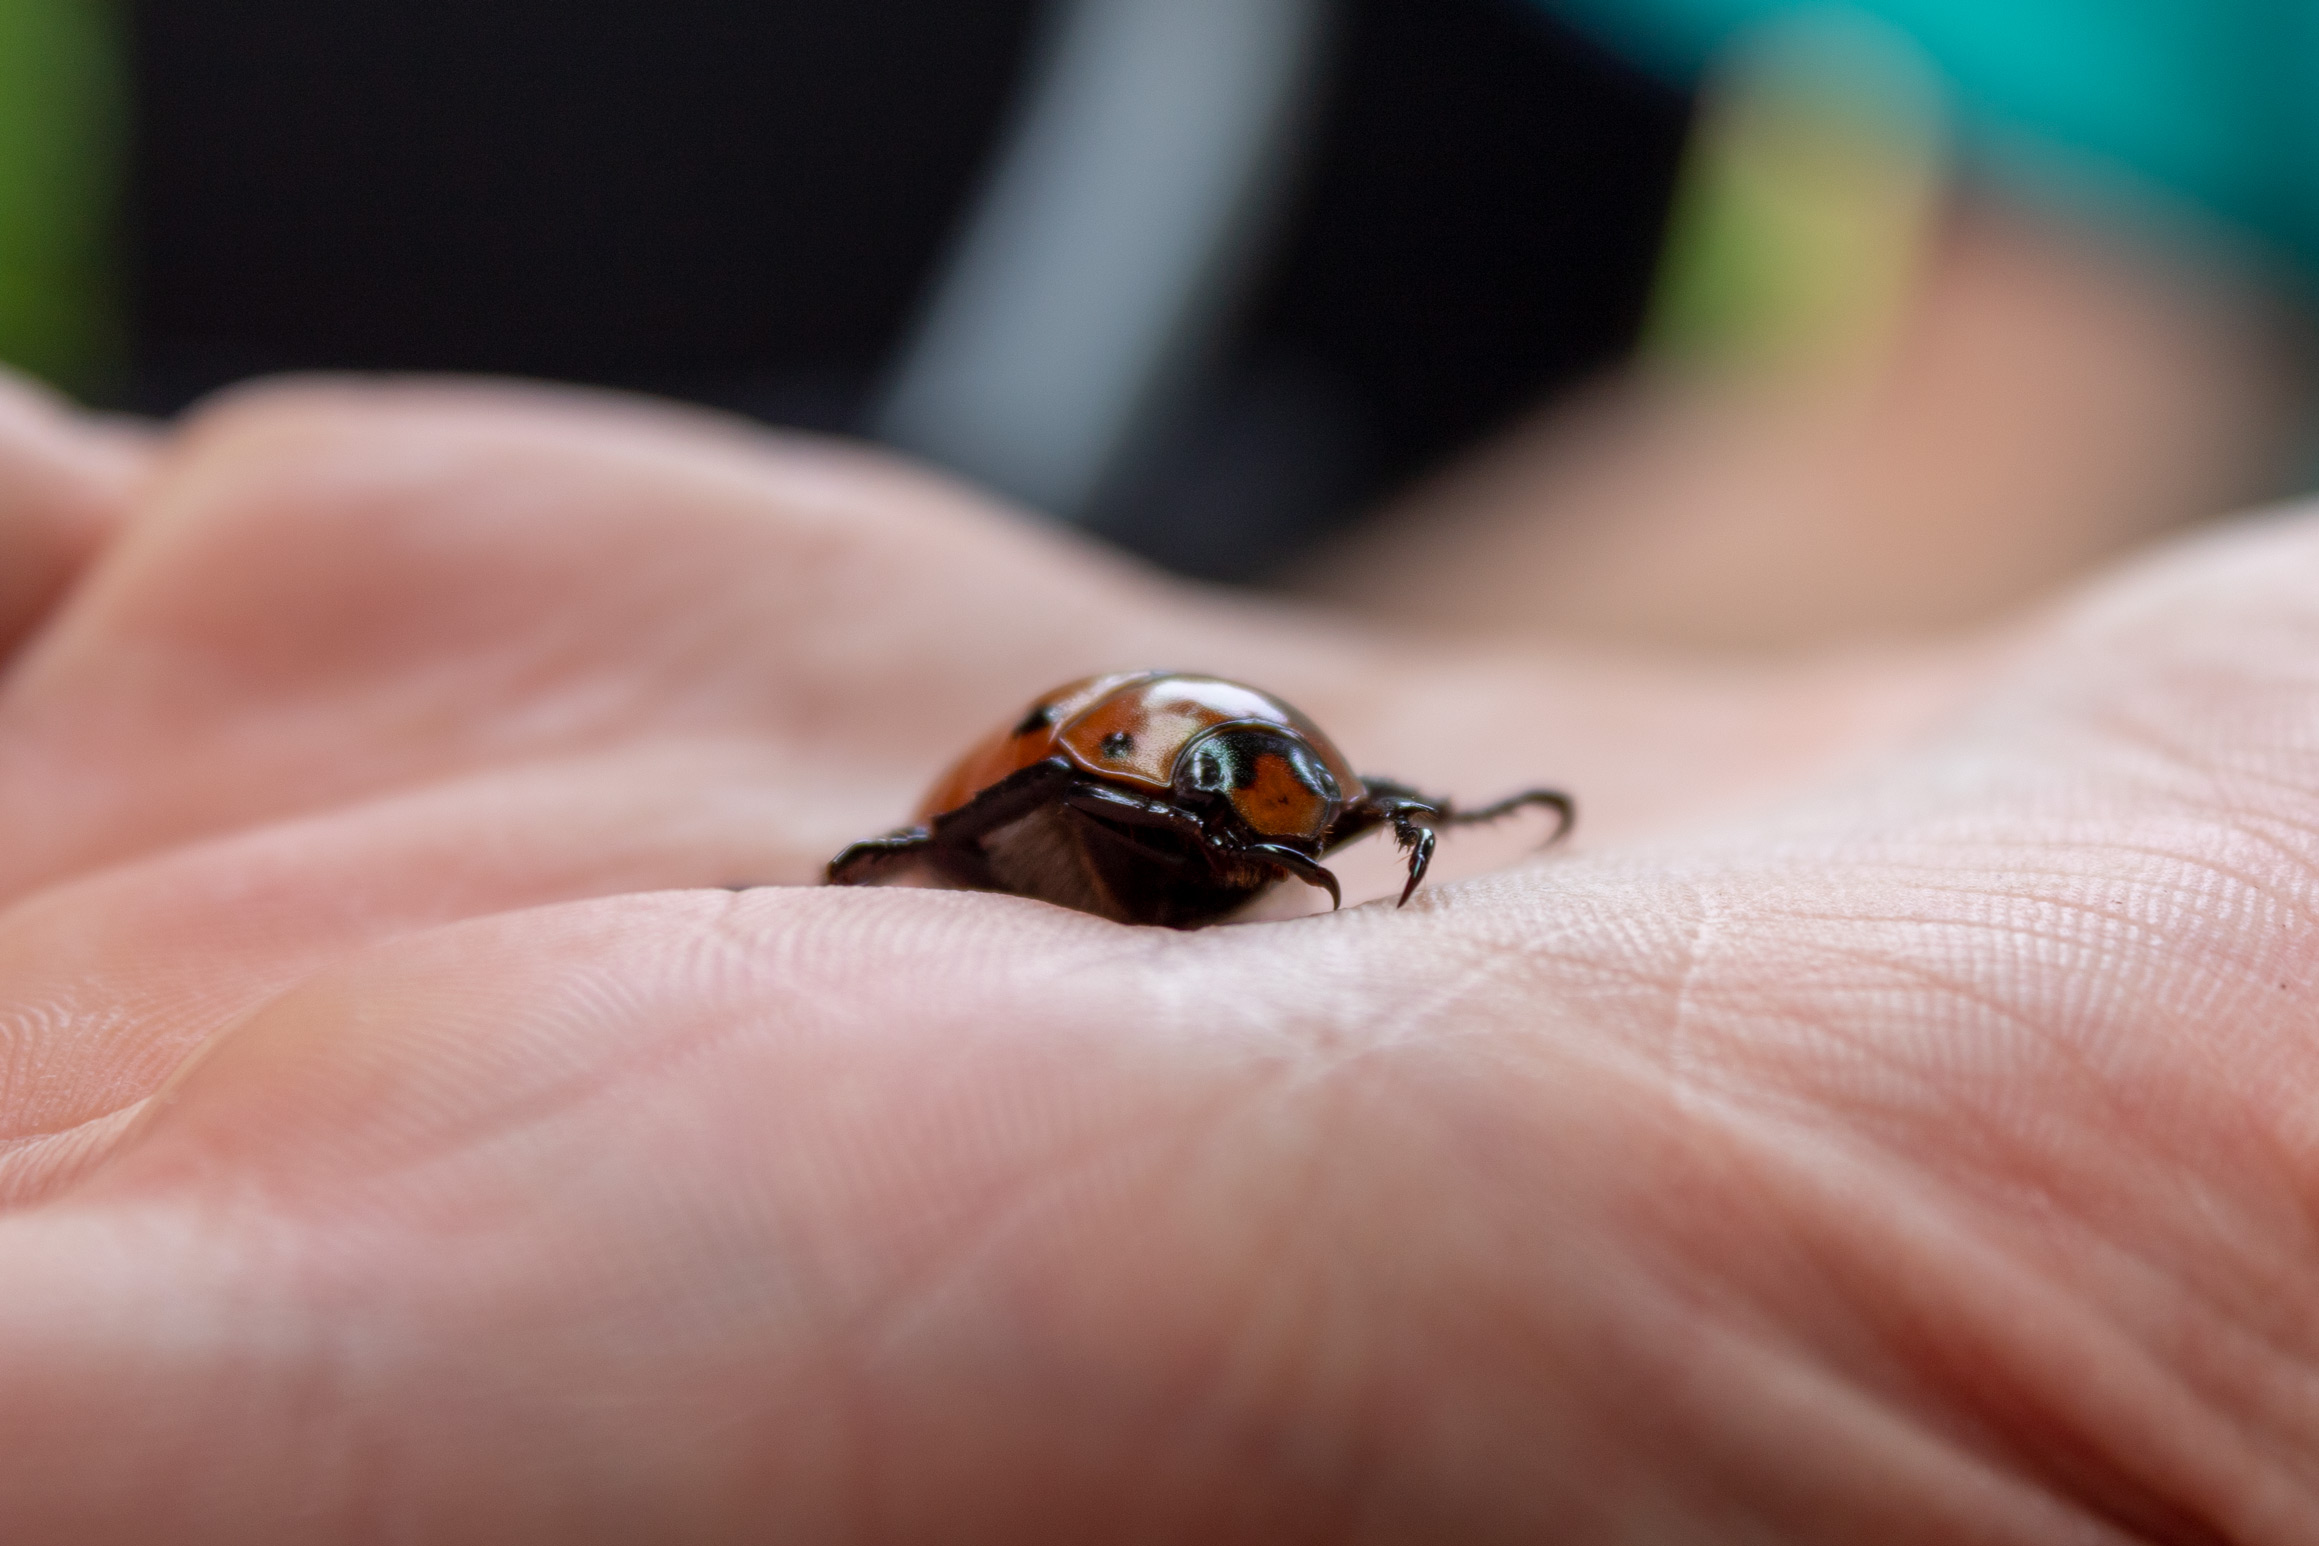 Large orange beetle with black spots sitting on an open hand viewed from the side